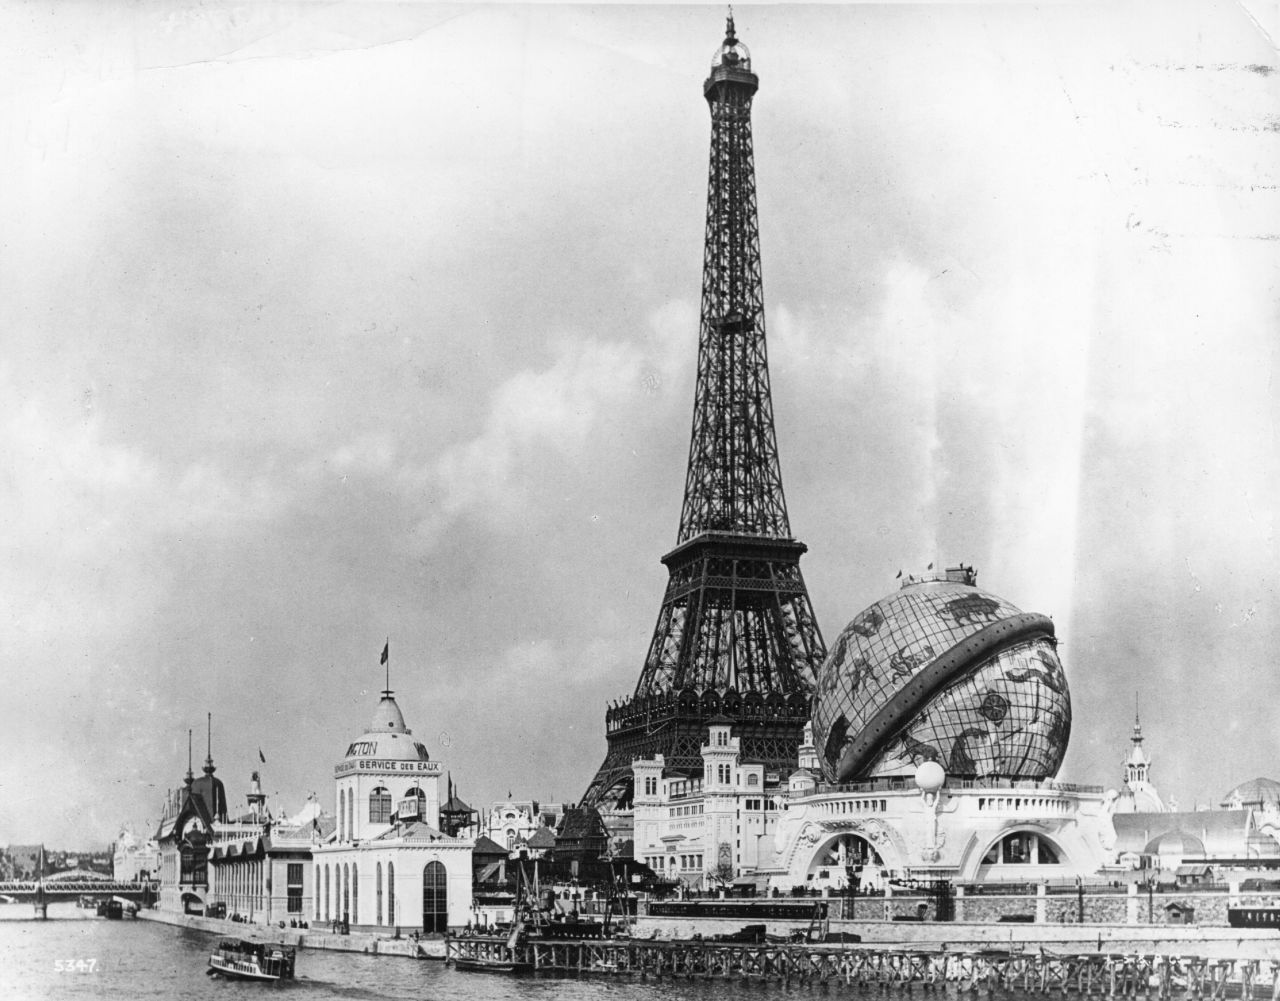 Four years later, the Games were held as part of the world's fair in the French capital. The Eiffel Tower was a central focus of the "Exposition Universelle."